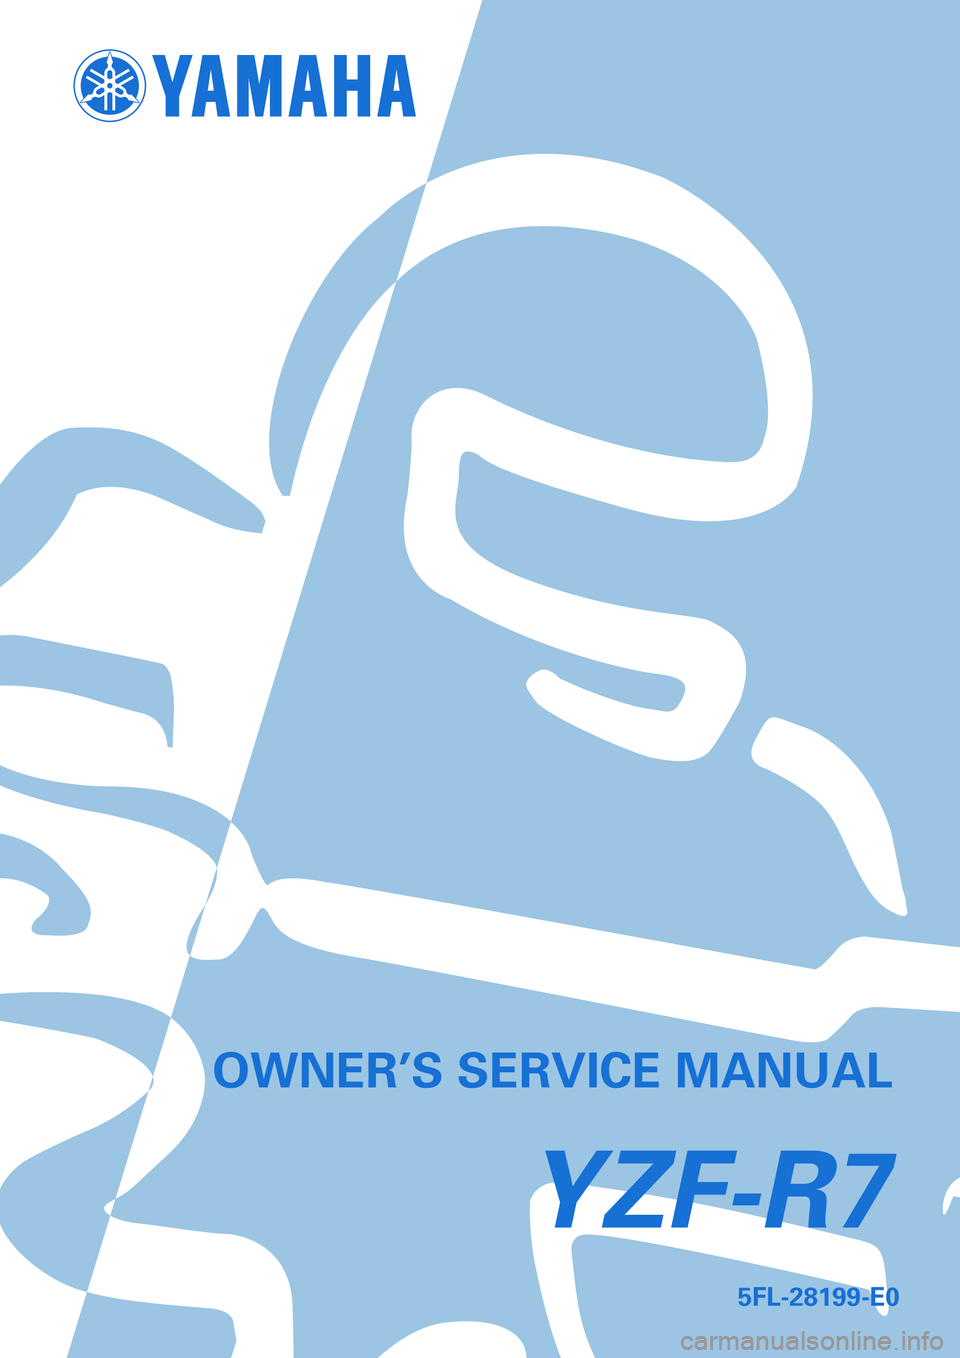 YAMAHA YZF-R7 1999  Owners Manual 5FL-28199-E0
YZF-R7
OWNER’S SERVICE MANUAL 